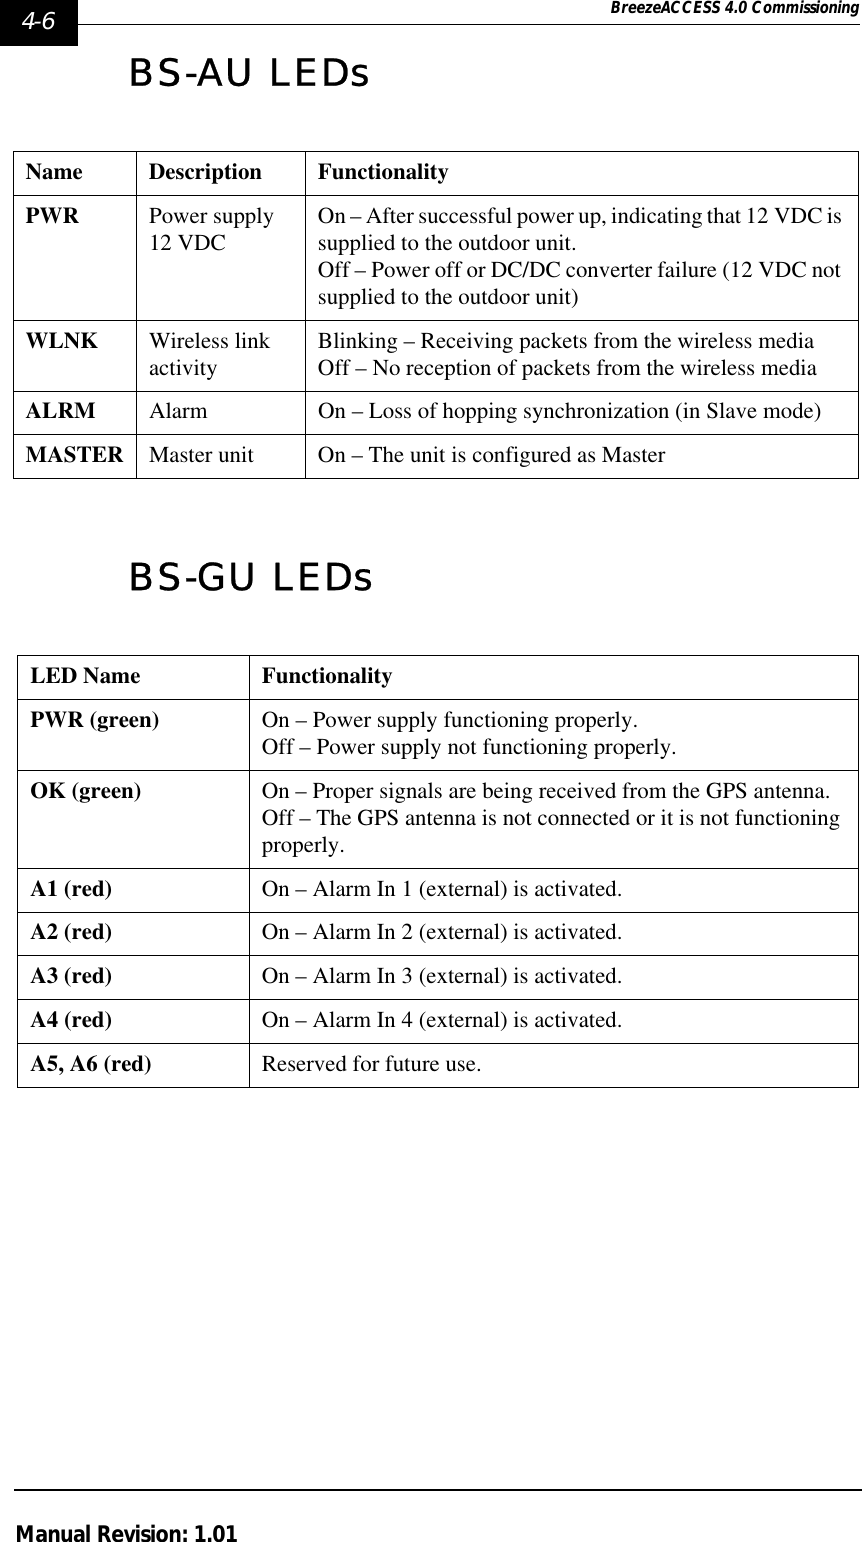 4-6 BreezeACCESS 4.0 CommissioningManual Revision: 1.01BS-AU LEDsBS-GU LEDsName Description FunctionalityPWR Power supply 12 VDC On – After successful power up, indicating that 12 VDC is supplied to the outdoor unit. Off – Power off or DC/DC converter failure (12 VDC not supplied to the outdoor unit)WLNK Wireless link activity Blinking – Receiving packets from the wireless mediaOff – No reception of packets from the wireless mediaALRM Alarm On – Loss of hopping synchronization (in Slave mode)MASTER Master unit On – The unit is configured as MasterLED Name FunctionalityPWR (green) On – Power supply functioning properly.Off – Power supply not functioning properly.OK (green) On – Proper signals are being received from the GPS antenna.Off – The GPS antenna is not connected or it is not functioning properly.A1 (red) On – Alarm In 1 (external) is activated.A2 (red) On – Alarm In 2 (external) is activated.A3 (red) On – Alarm In 3 (external) is activated.A4 (red)  On – Alarm In 4 (external) is activated.A5, A6 (red) Reserved for future use.